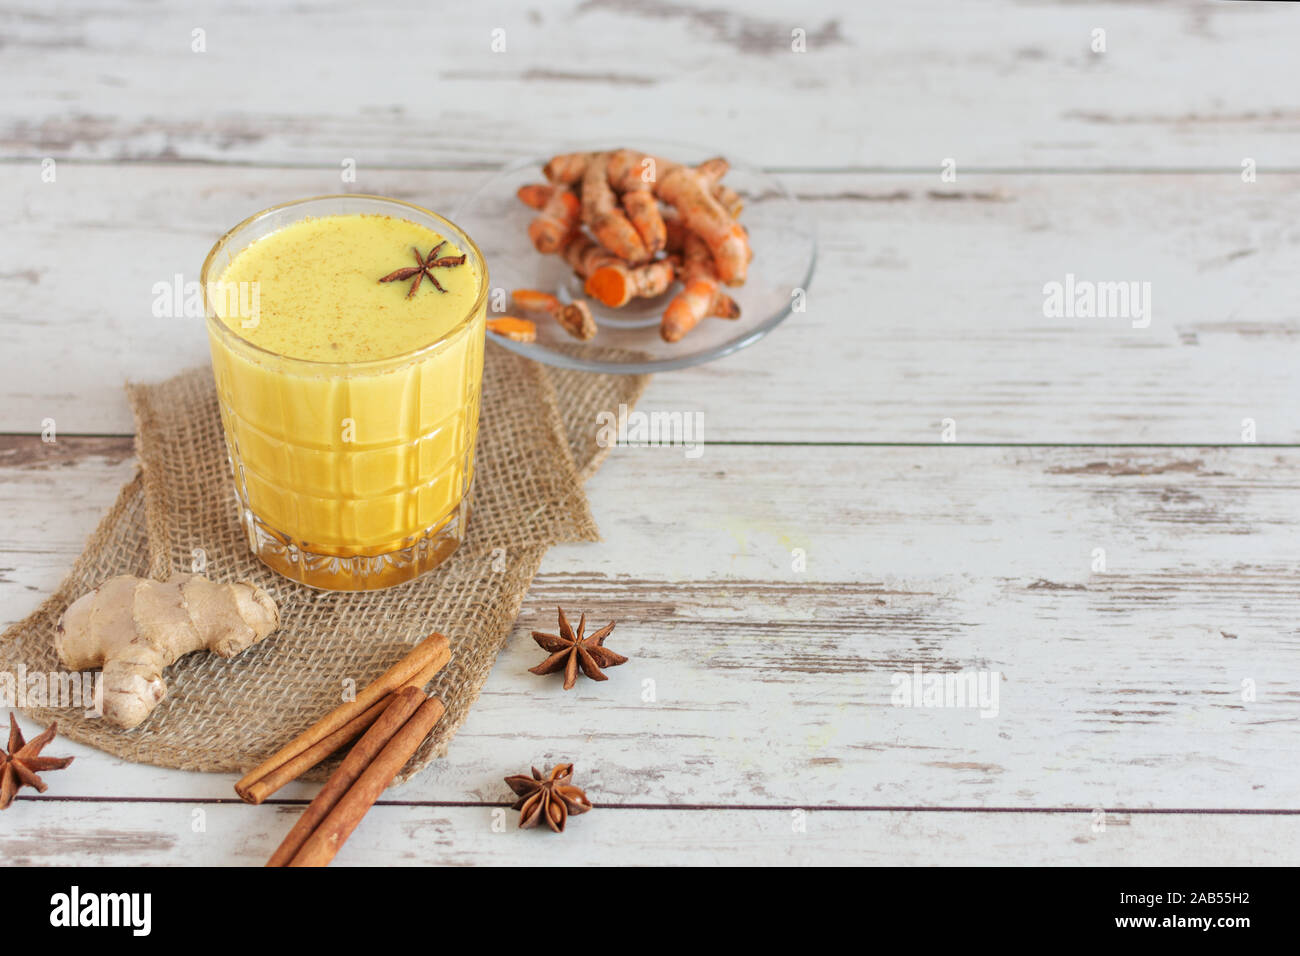 Golden turmeric milk with cinnamon and other aromatic spices. Healthy and aromatic detox beverage. Herbal medicine, anti-inflammatory therapy. Indian Stock Photo